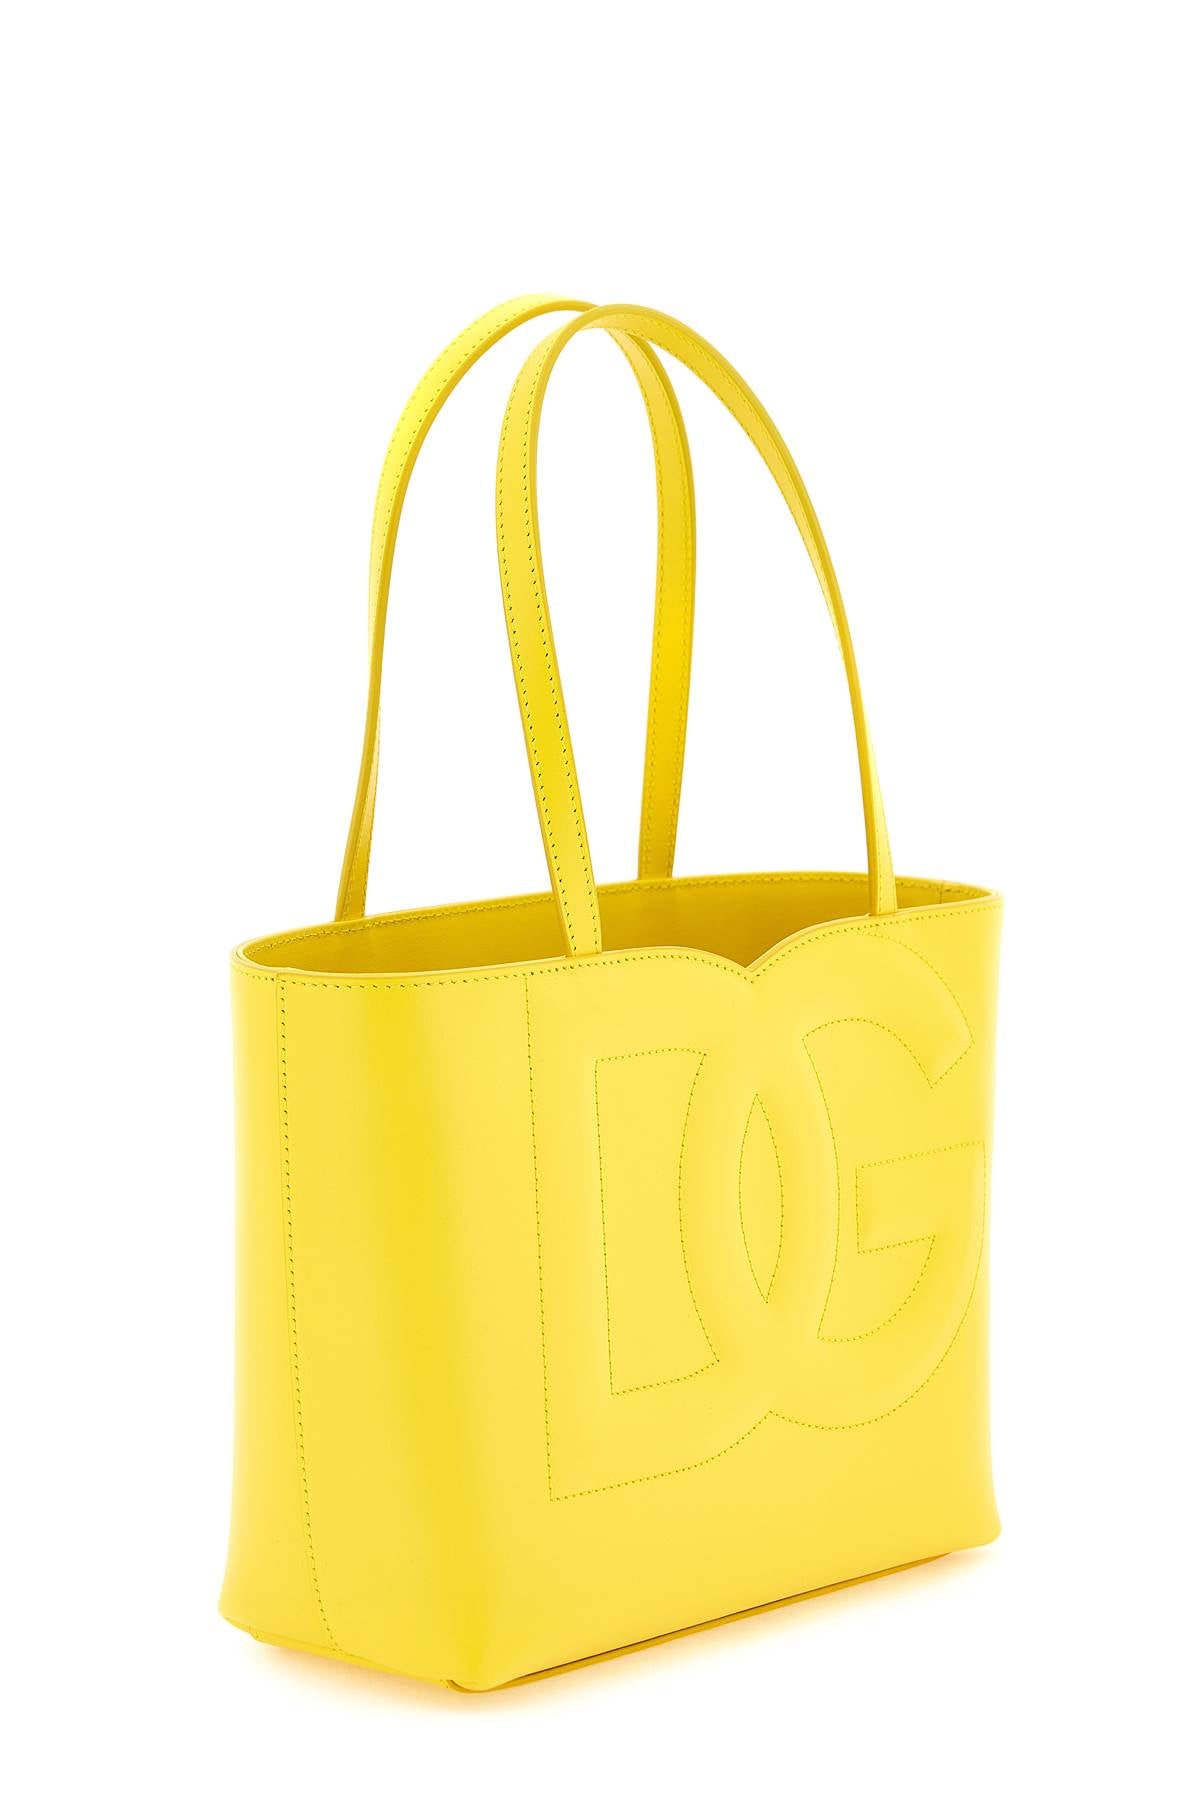 Dolce & gabbana leather tote bag with logo-2